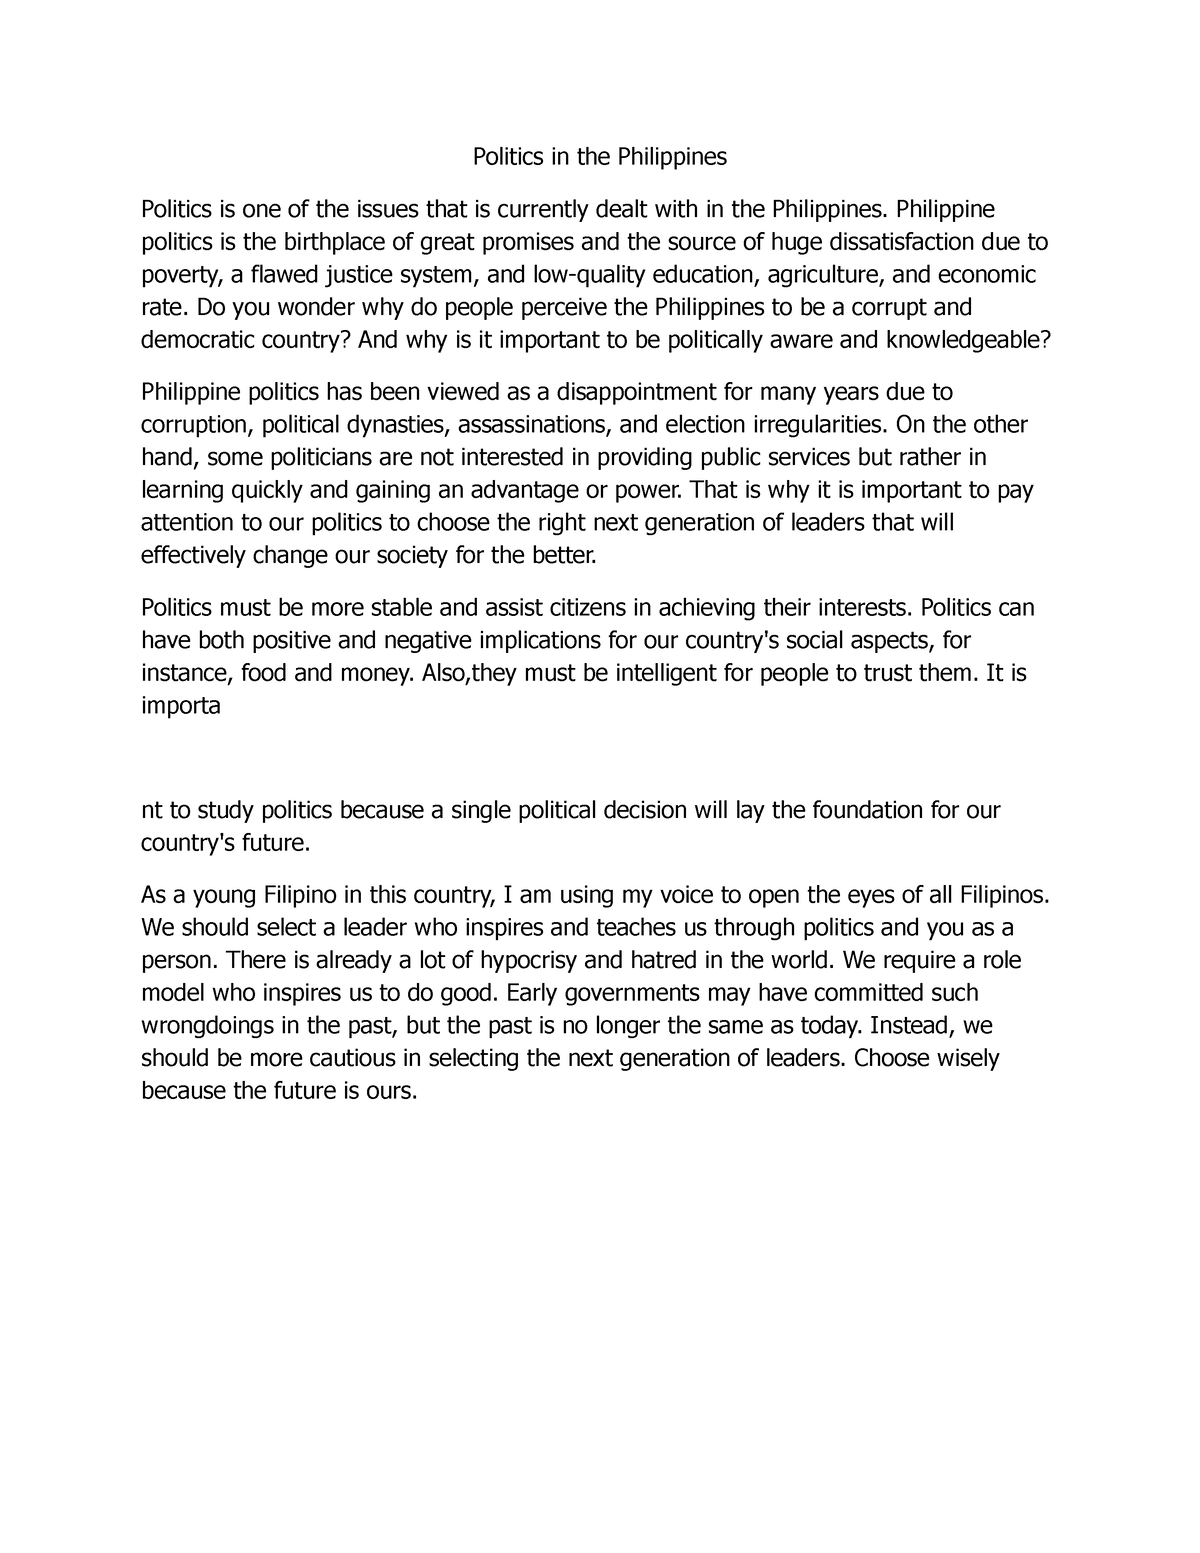 essay about politics in the philippines 2022